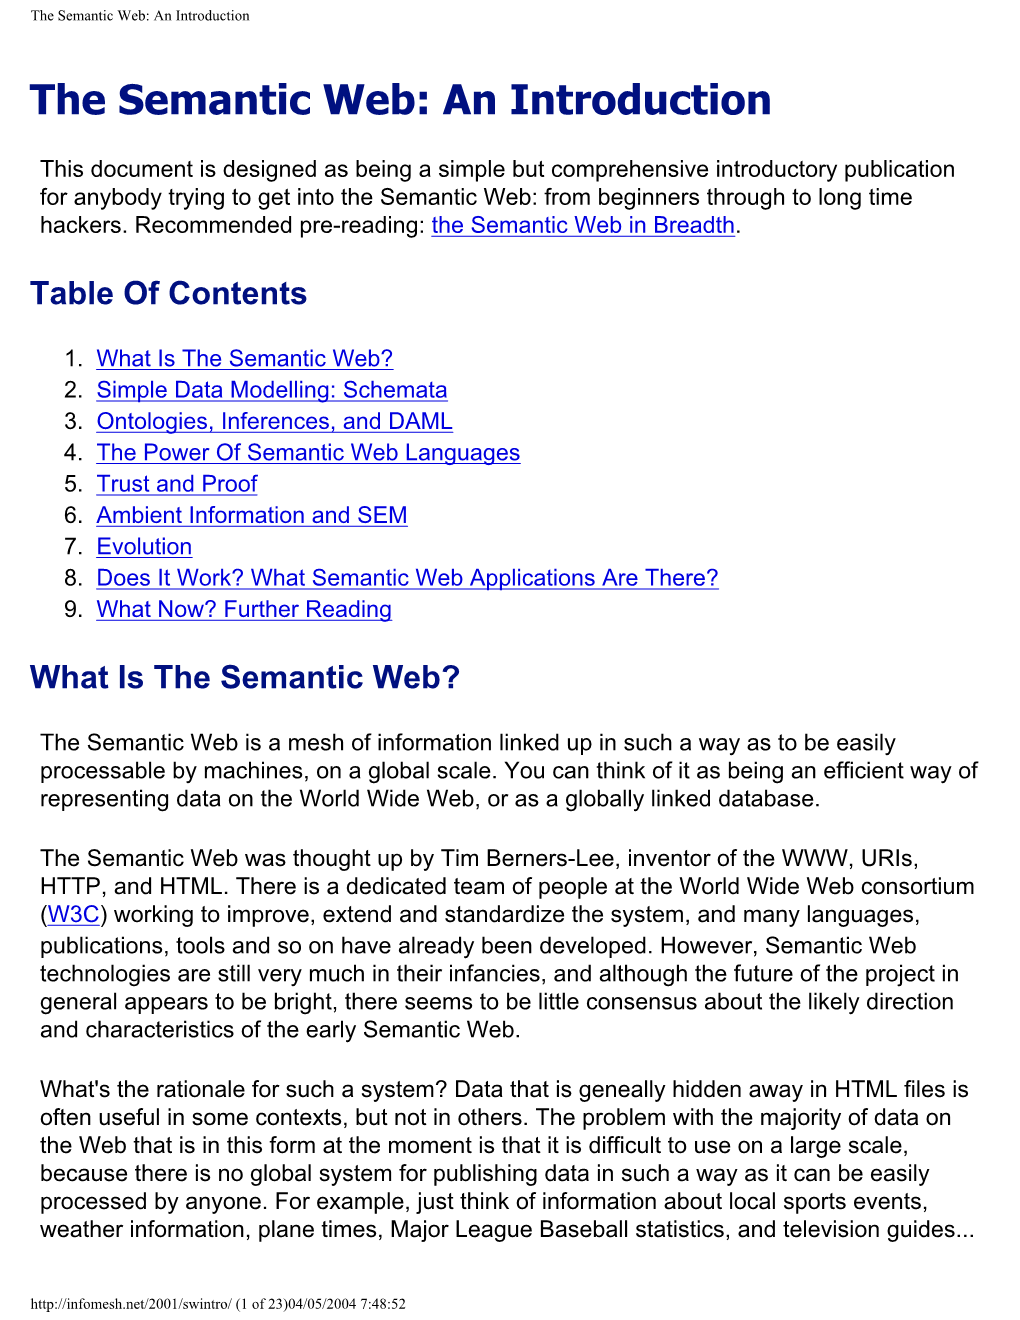 The Semantic Web: an Introduction